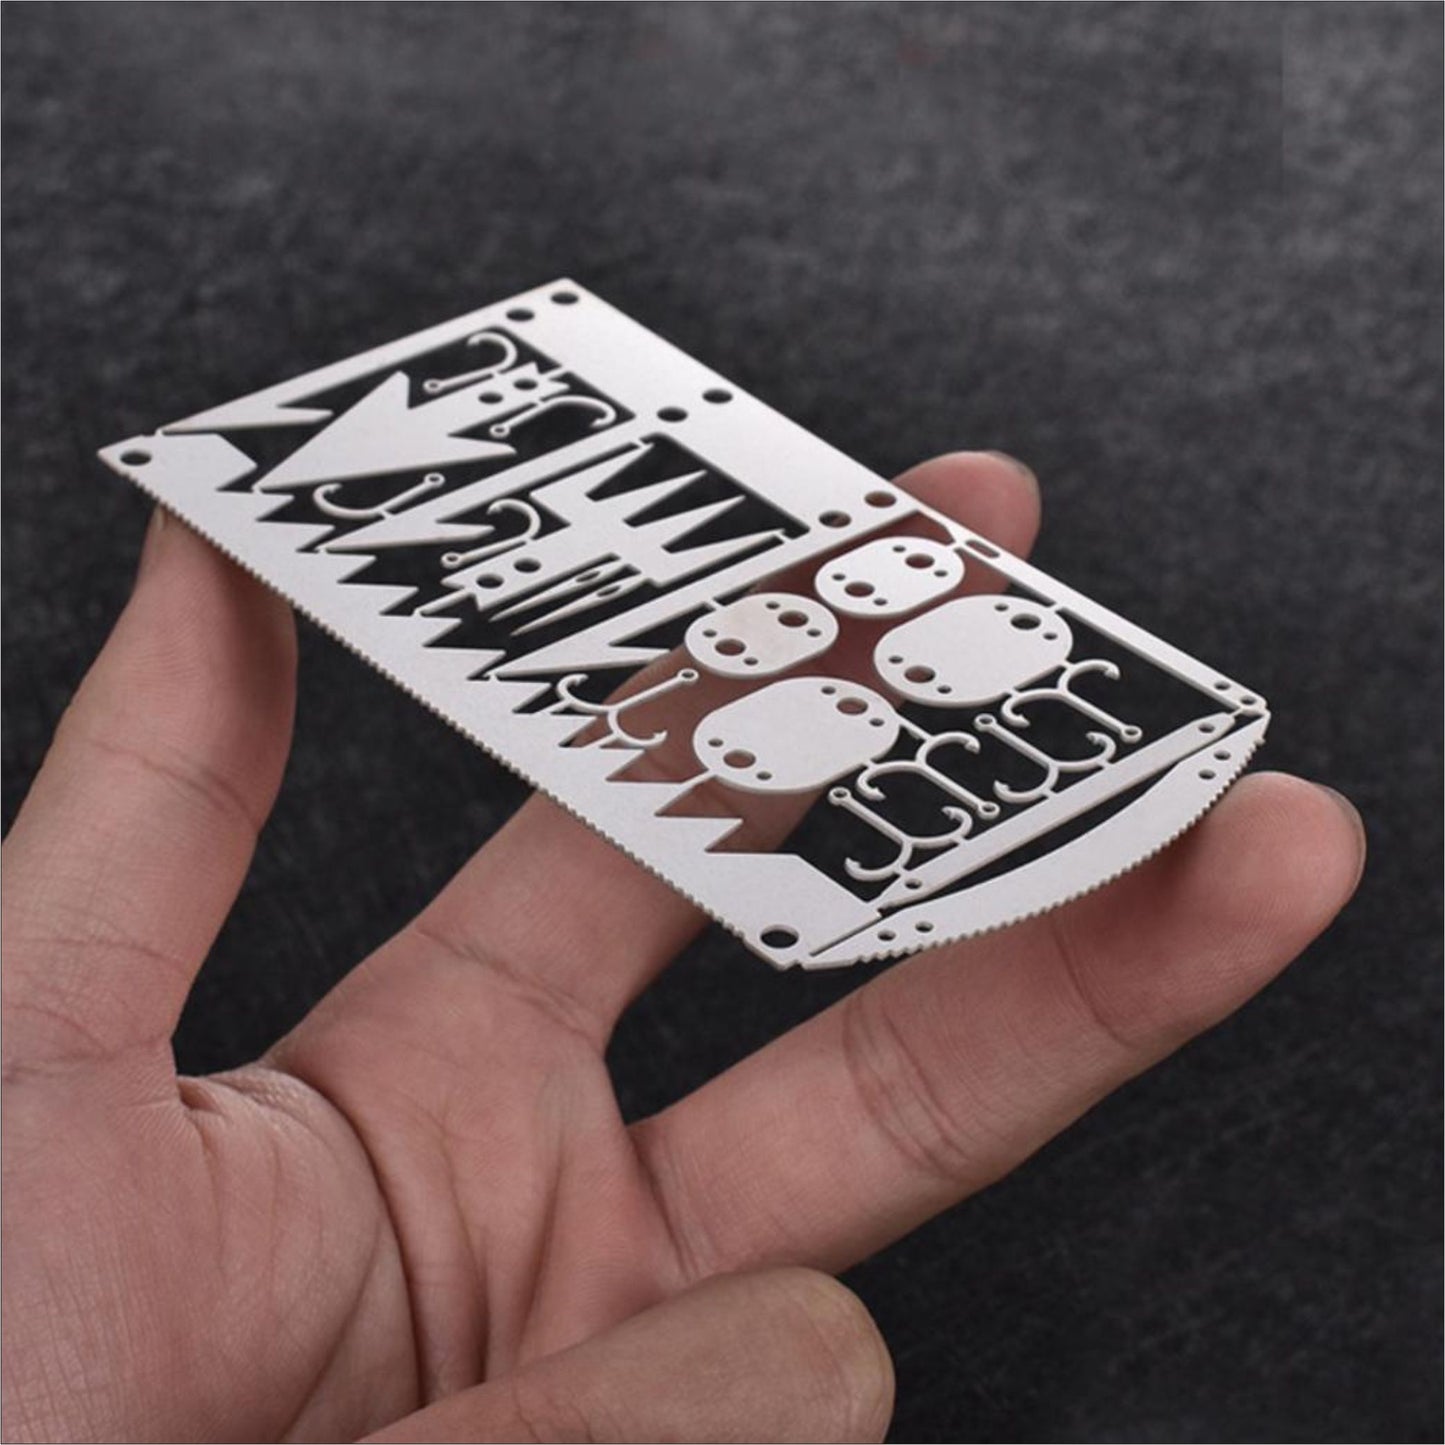 EDC 22 in 1 Survival Card SILVER Tactical Hunting Utility Emergency Hiking Travel Tools